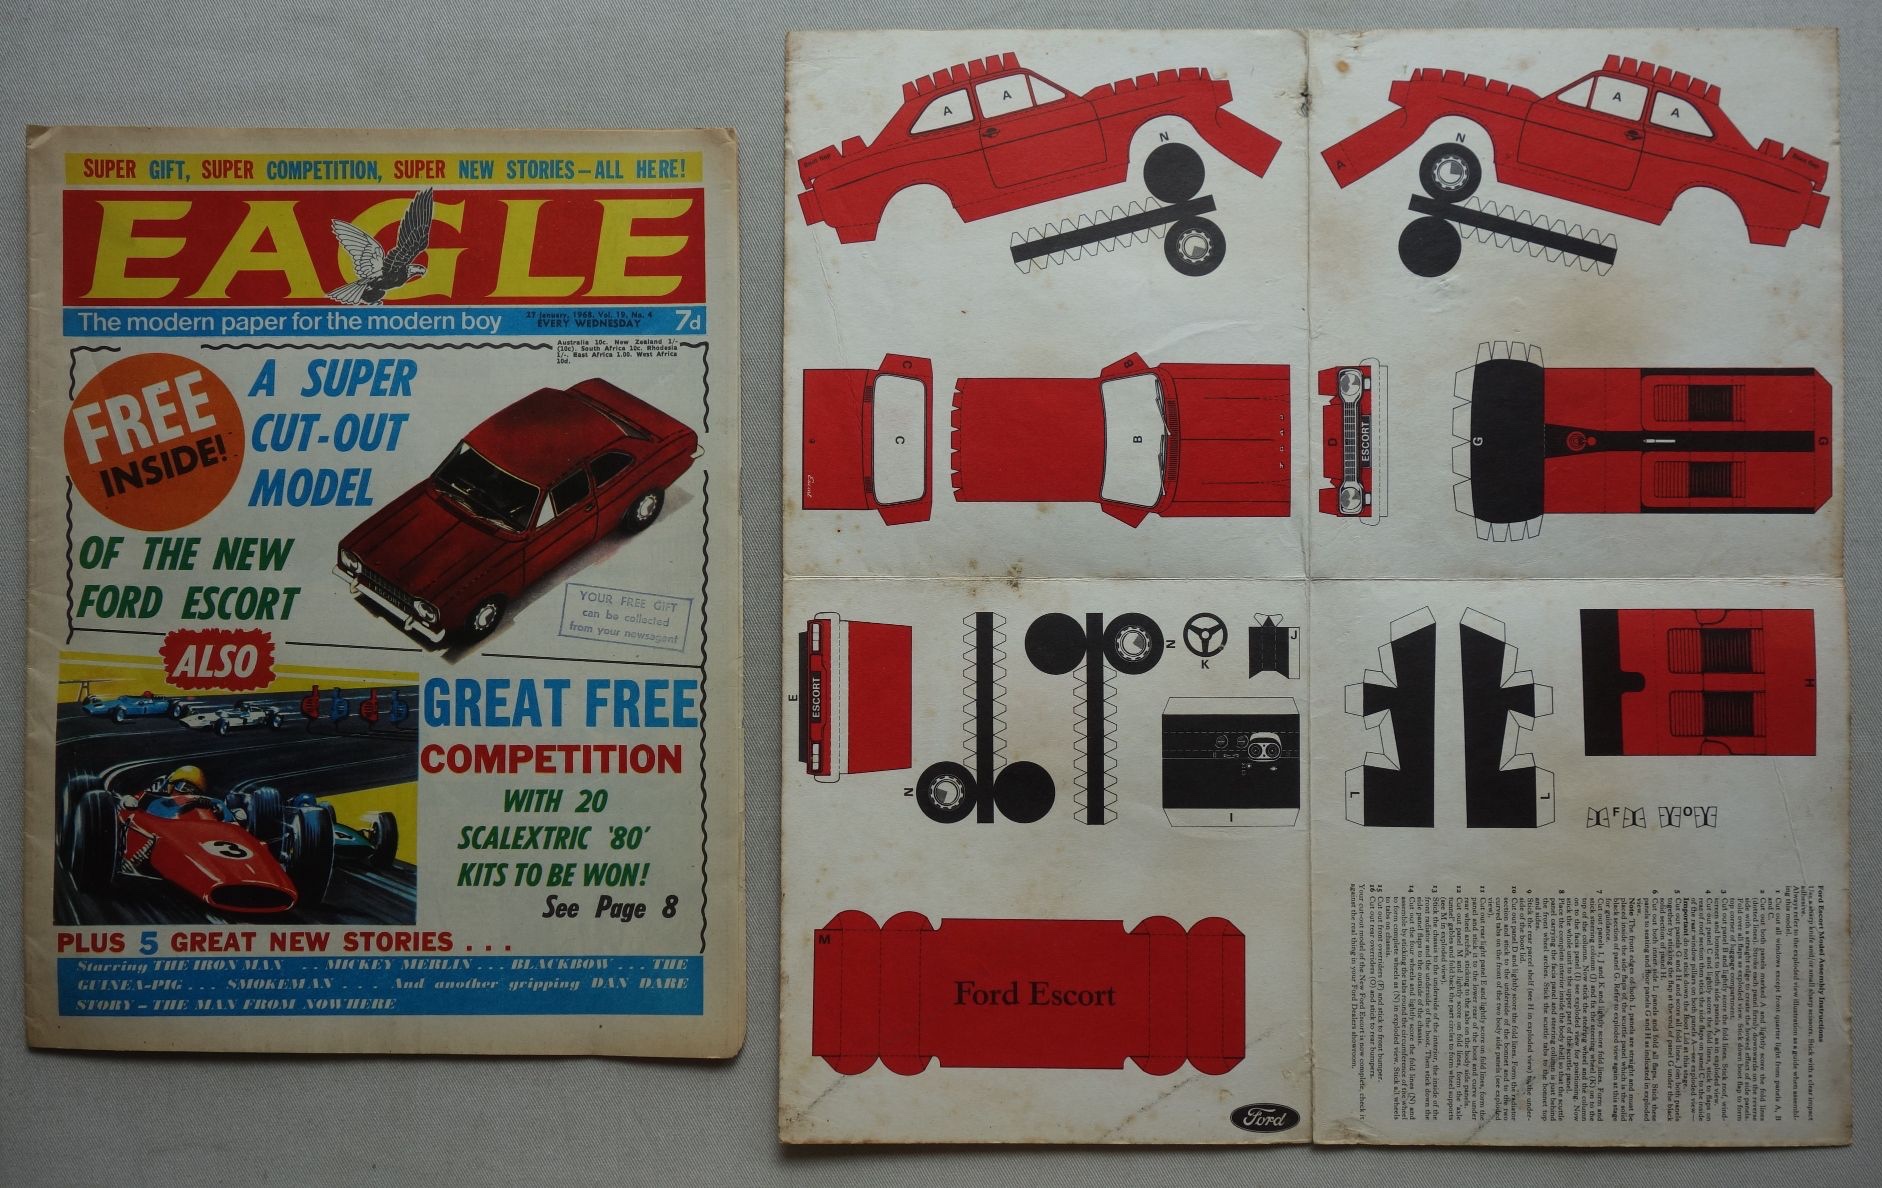 Eagle Volume 19 No. 4 - cover dated 27th January 1968 with Ford Escort stamp out gift